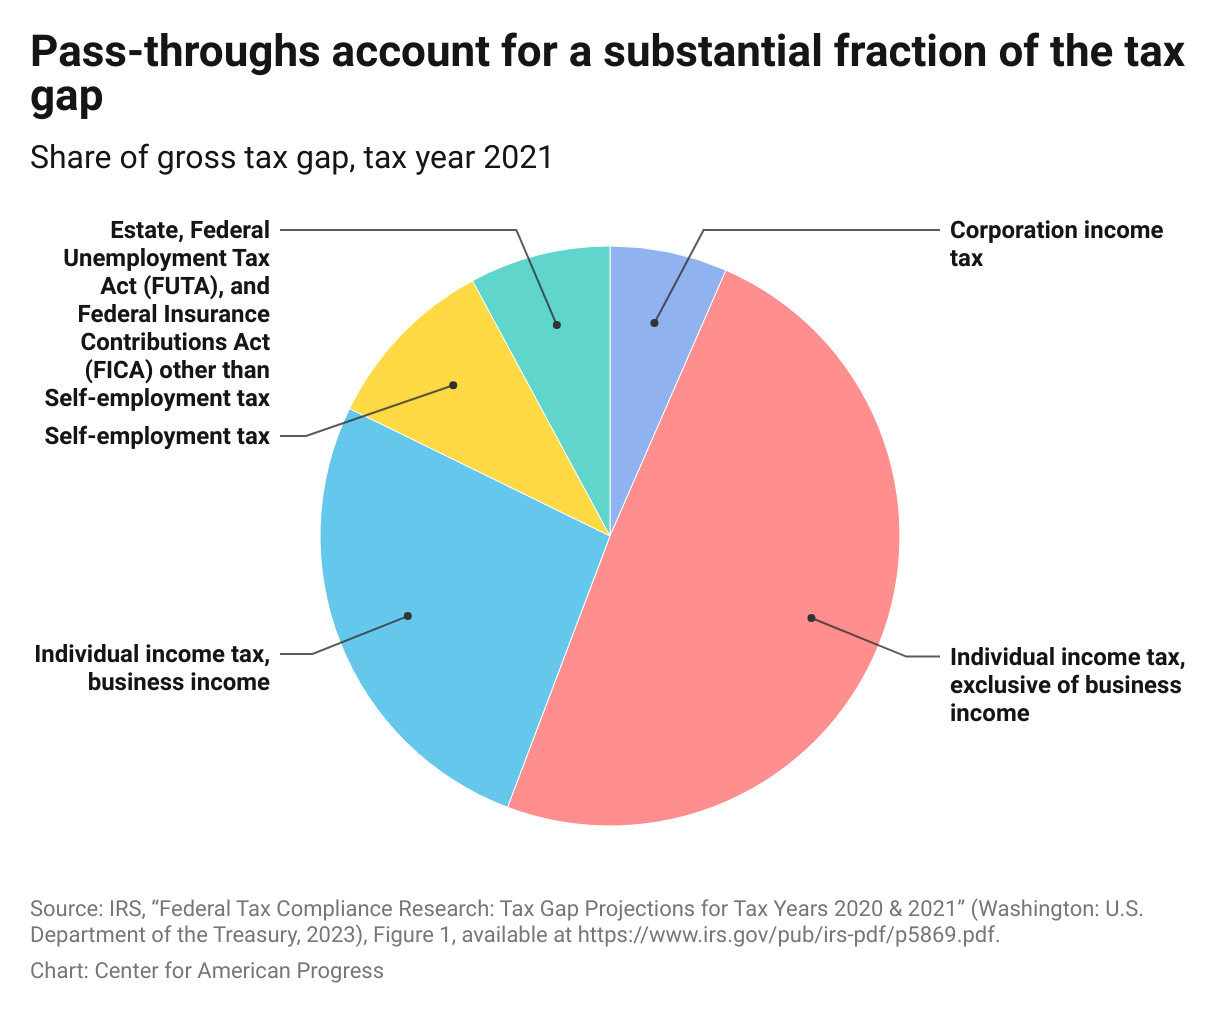 Pie chart showing that business income owed under the personal income tax and self-employment tax accounted for about one-third of the 2021 tax gap.